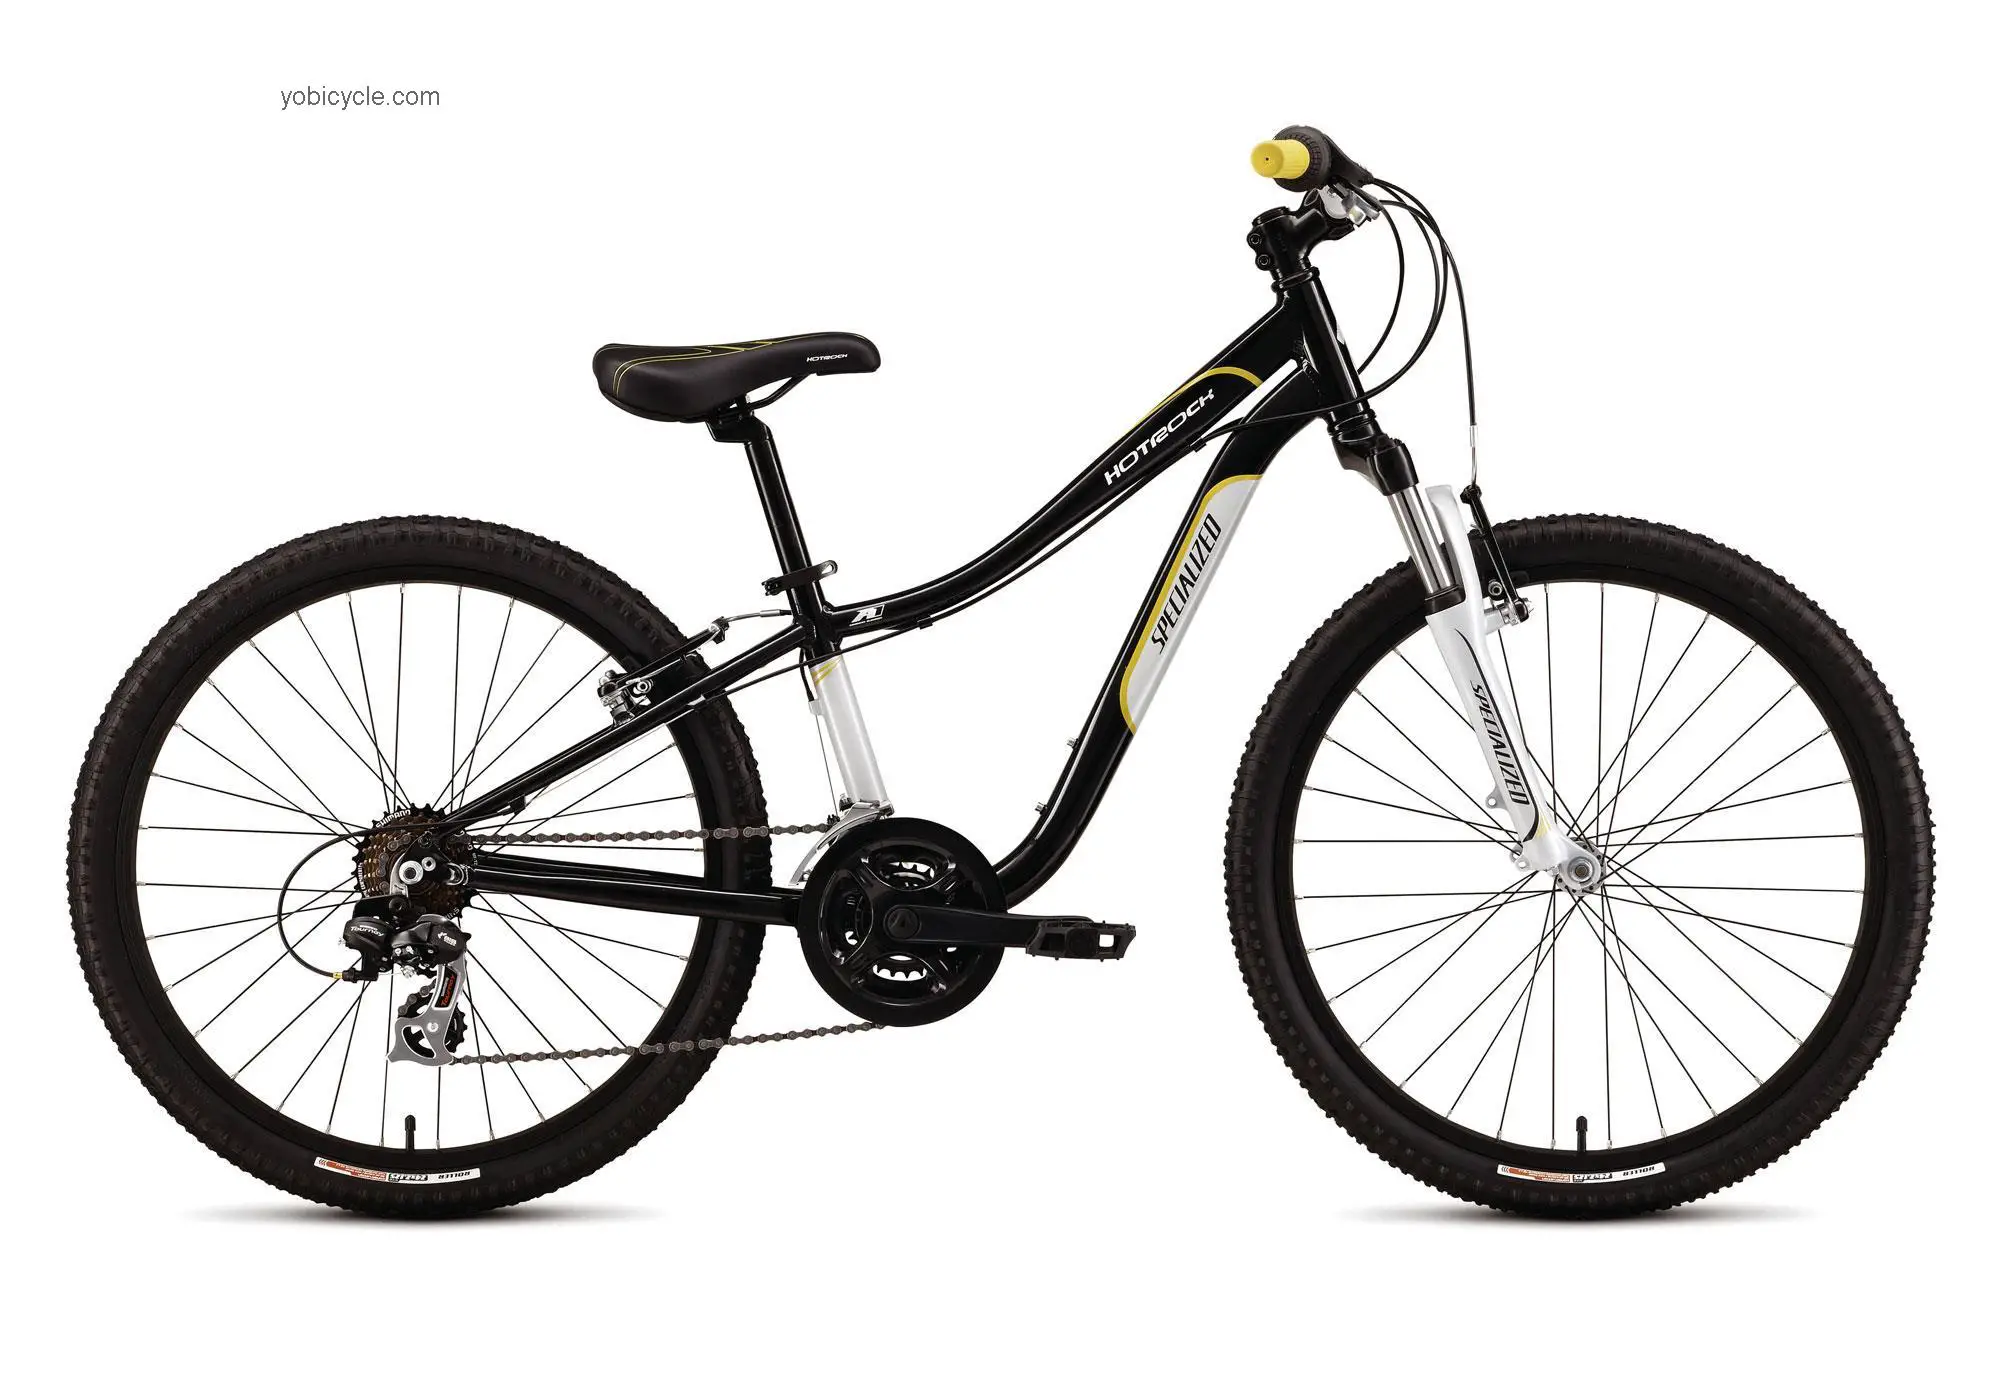 Specialized Hotrock 24 21-speed Boys 2012 comparison online with competitors